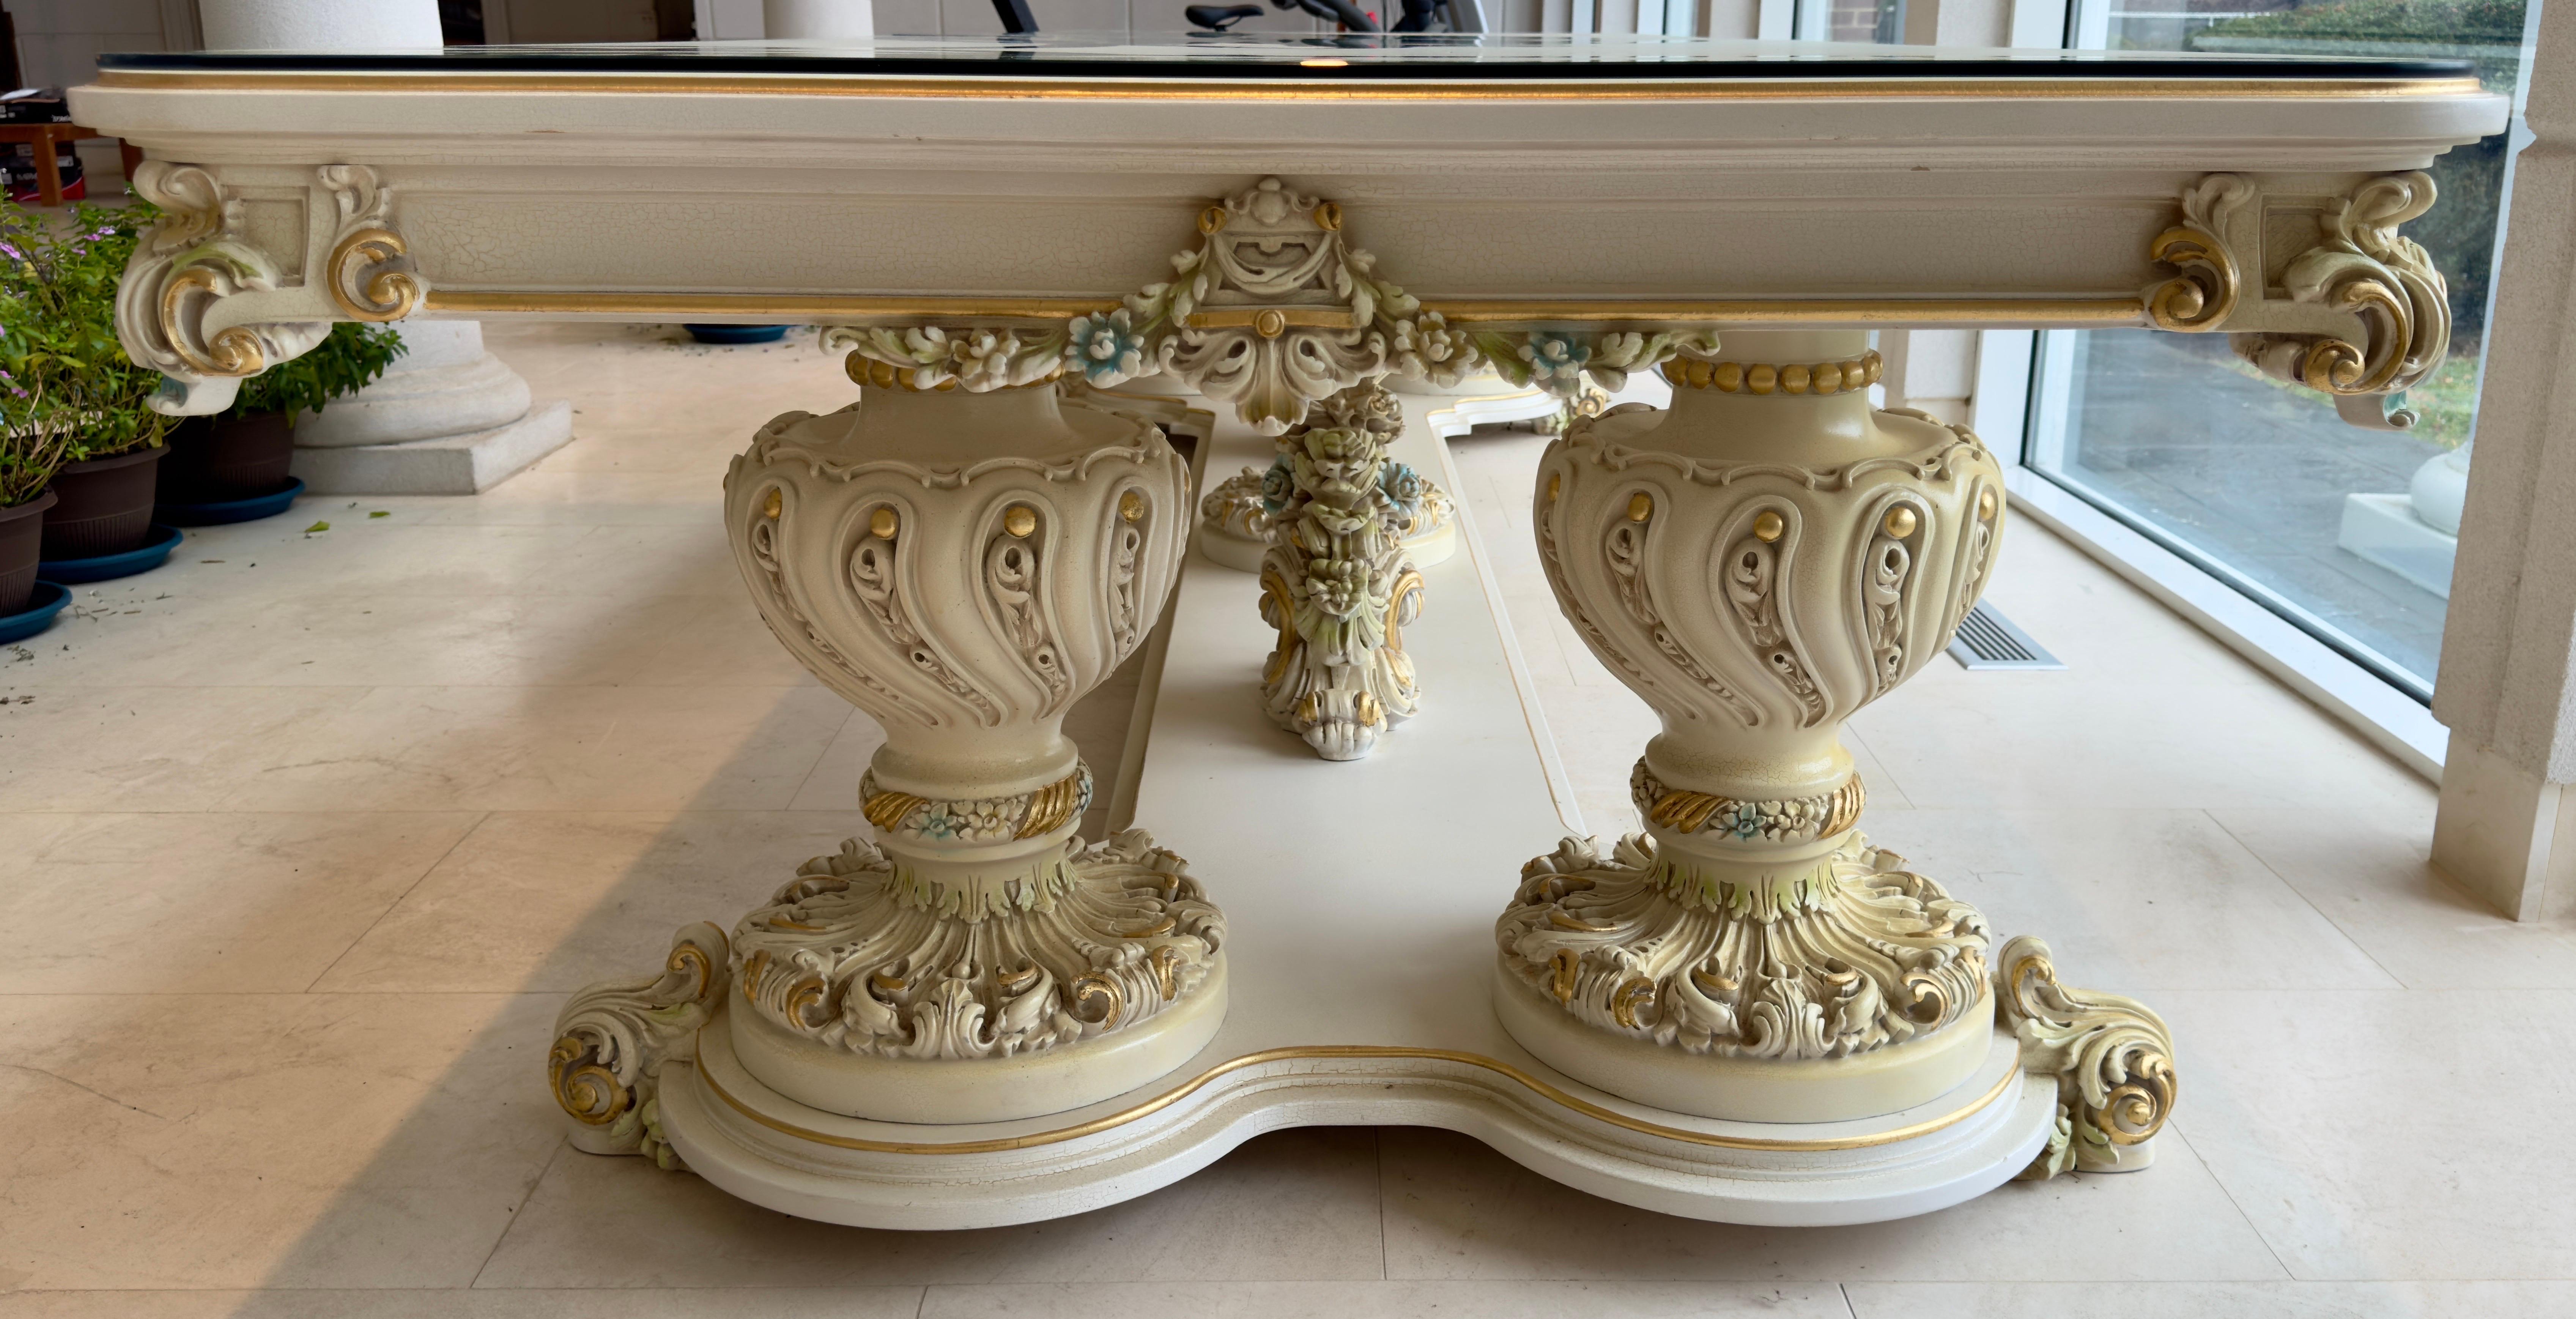 Monumental Italian Neoclassical Baroque Style Dining Table with Glass Top  For Sale 3